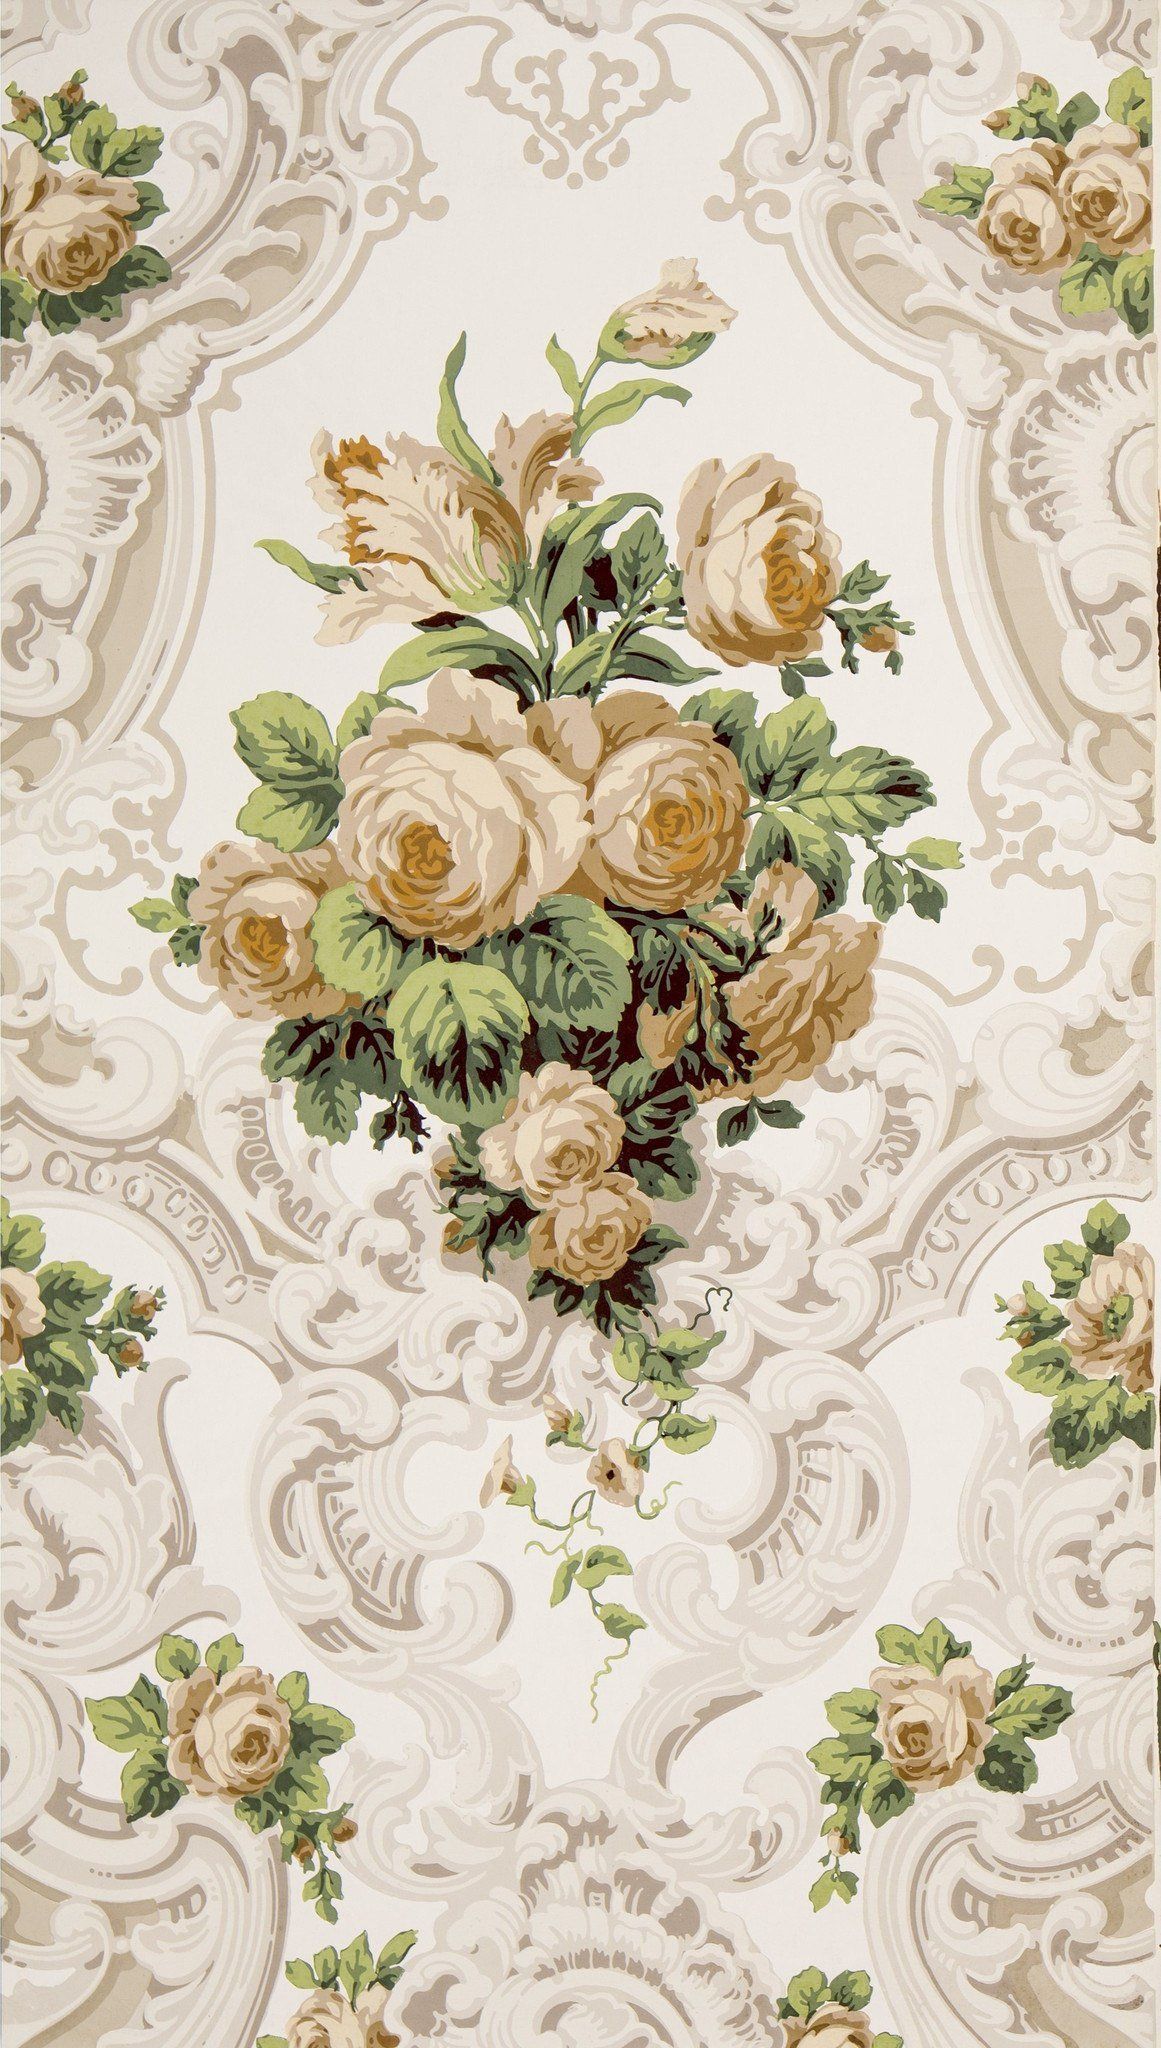 Large Rose Bouquets in Rococo Scrolls Wallpaper Remnant